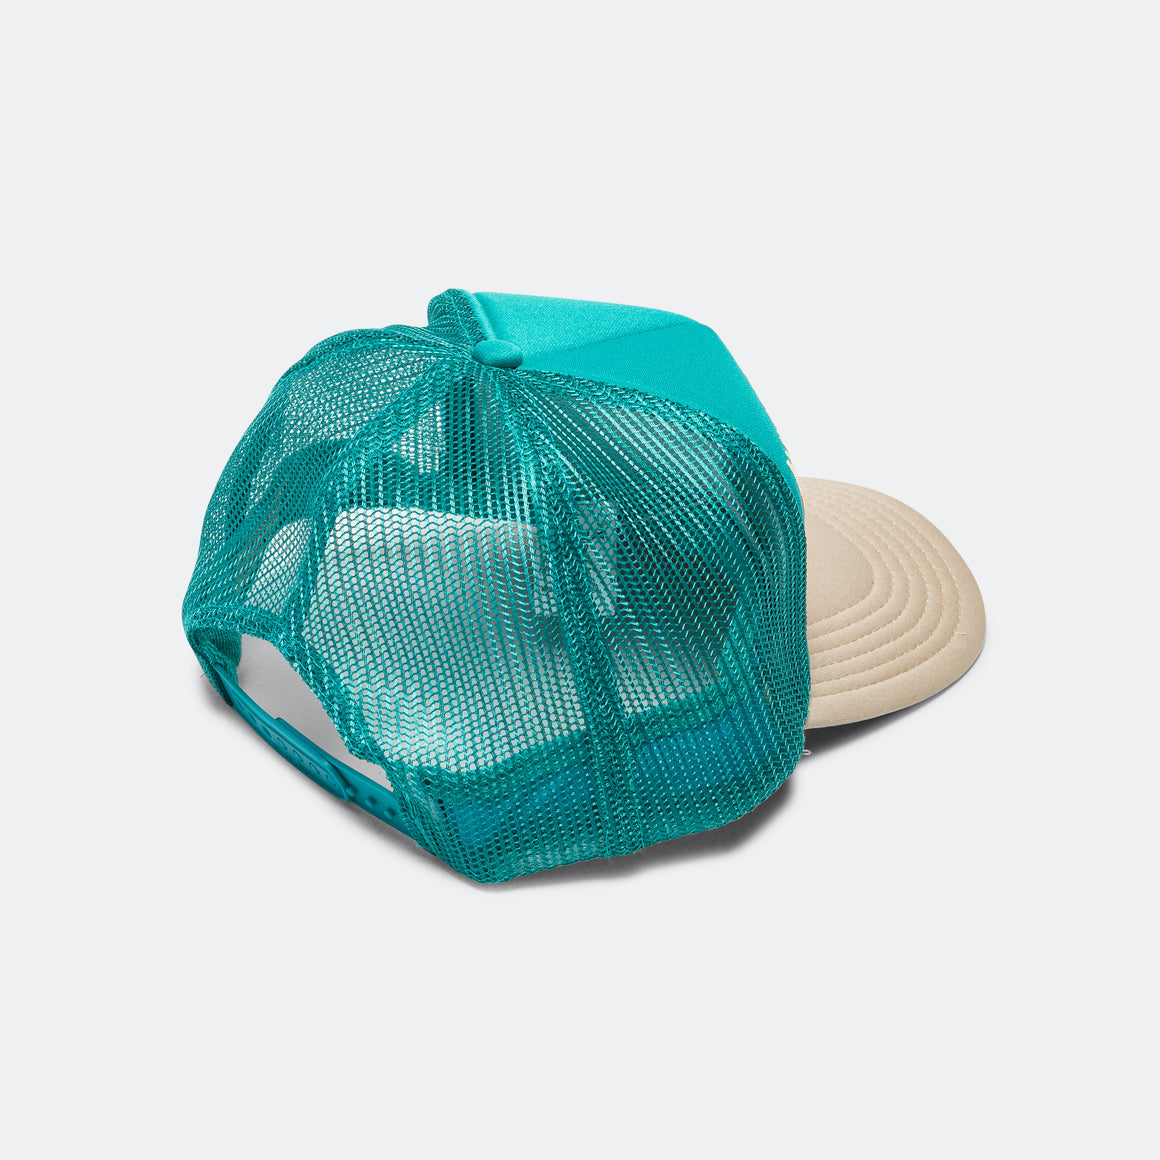 Kapital - KOUNTRY DIRTY SHRINK Trucker CAP - Turquoise x Beige - UP THERE